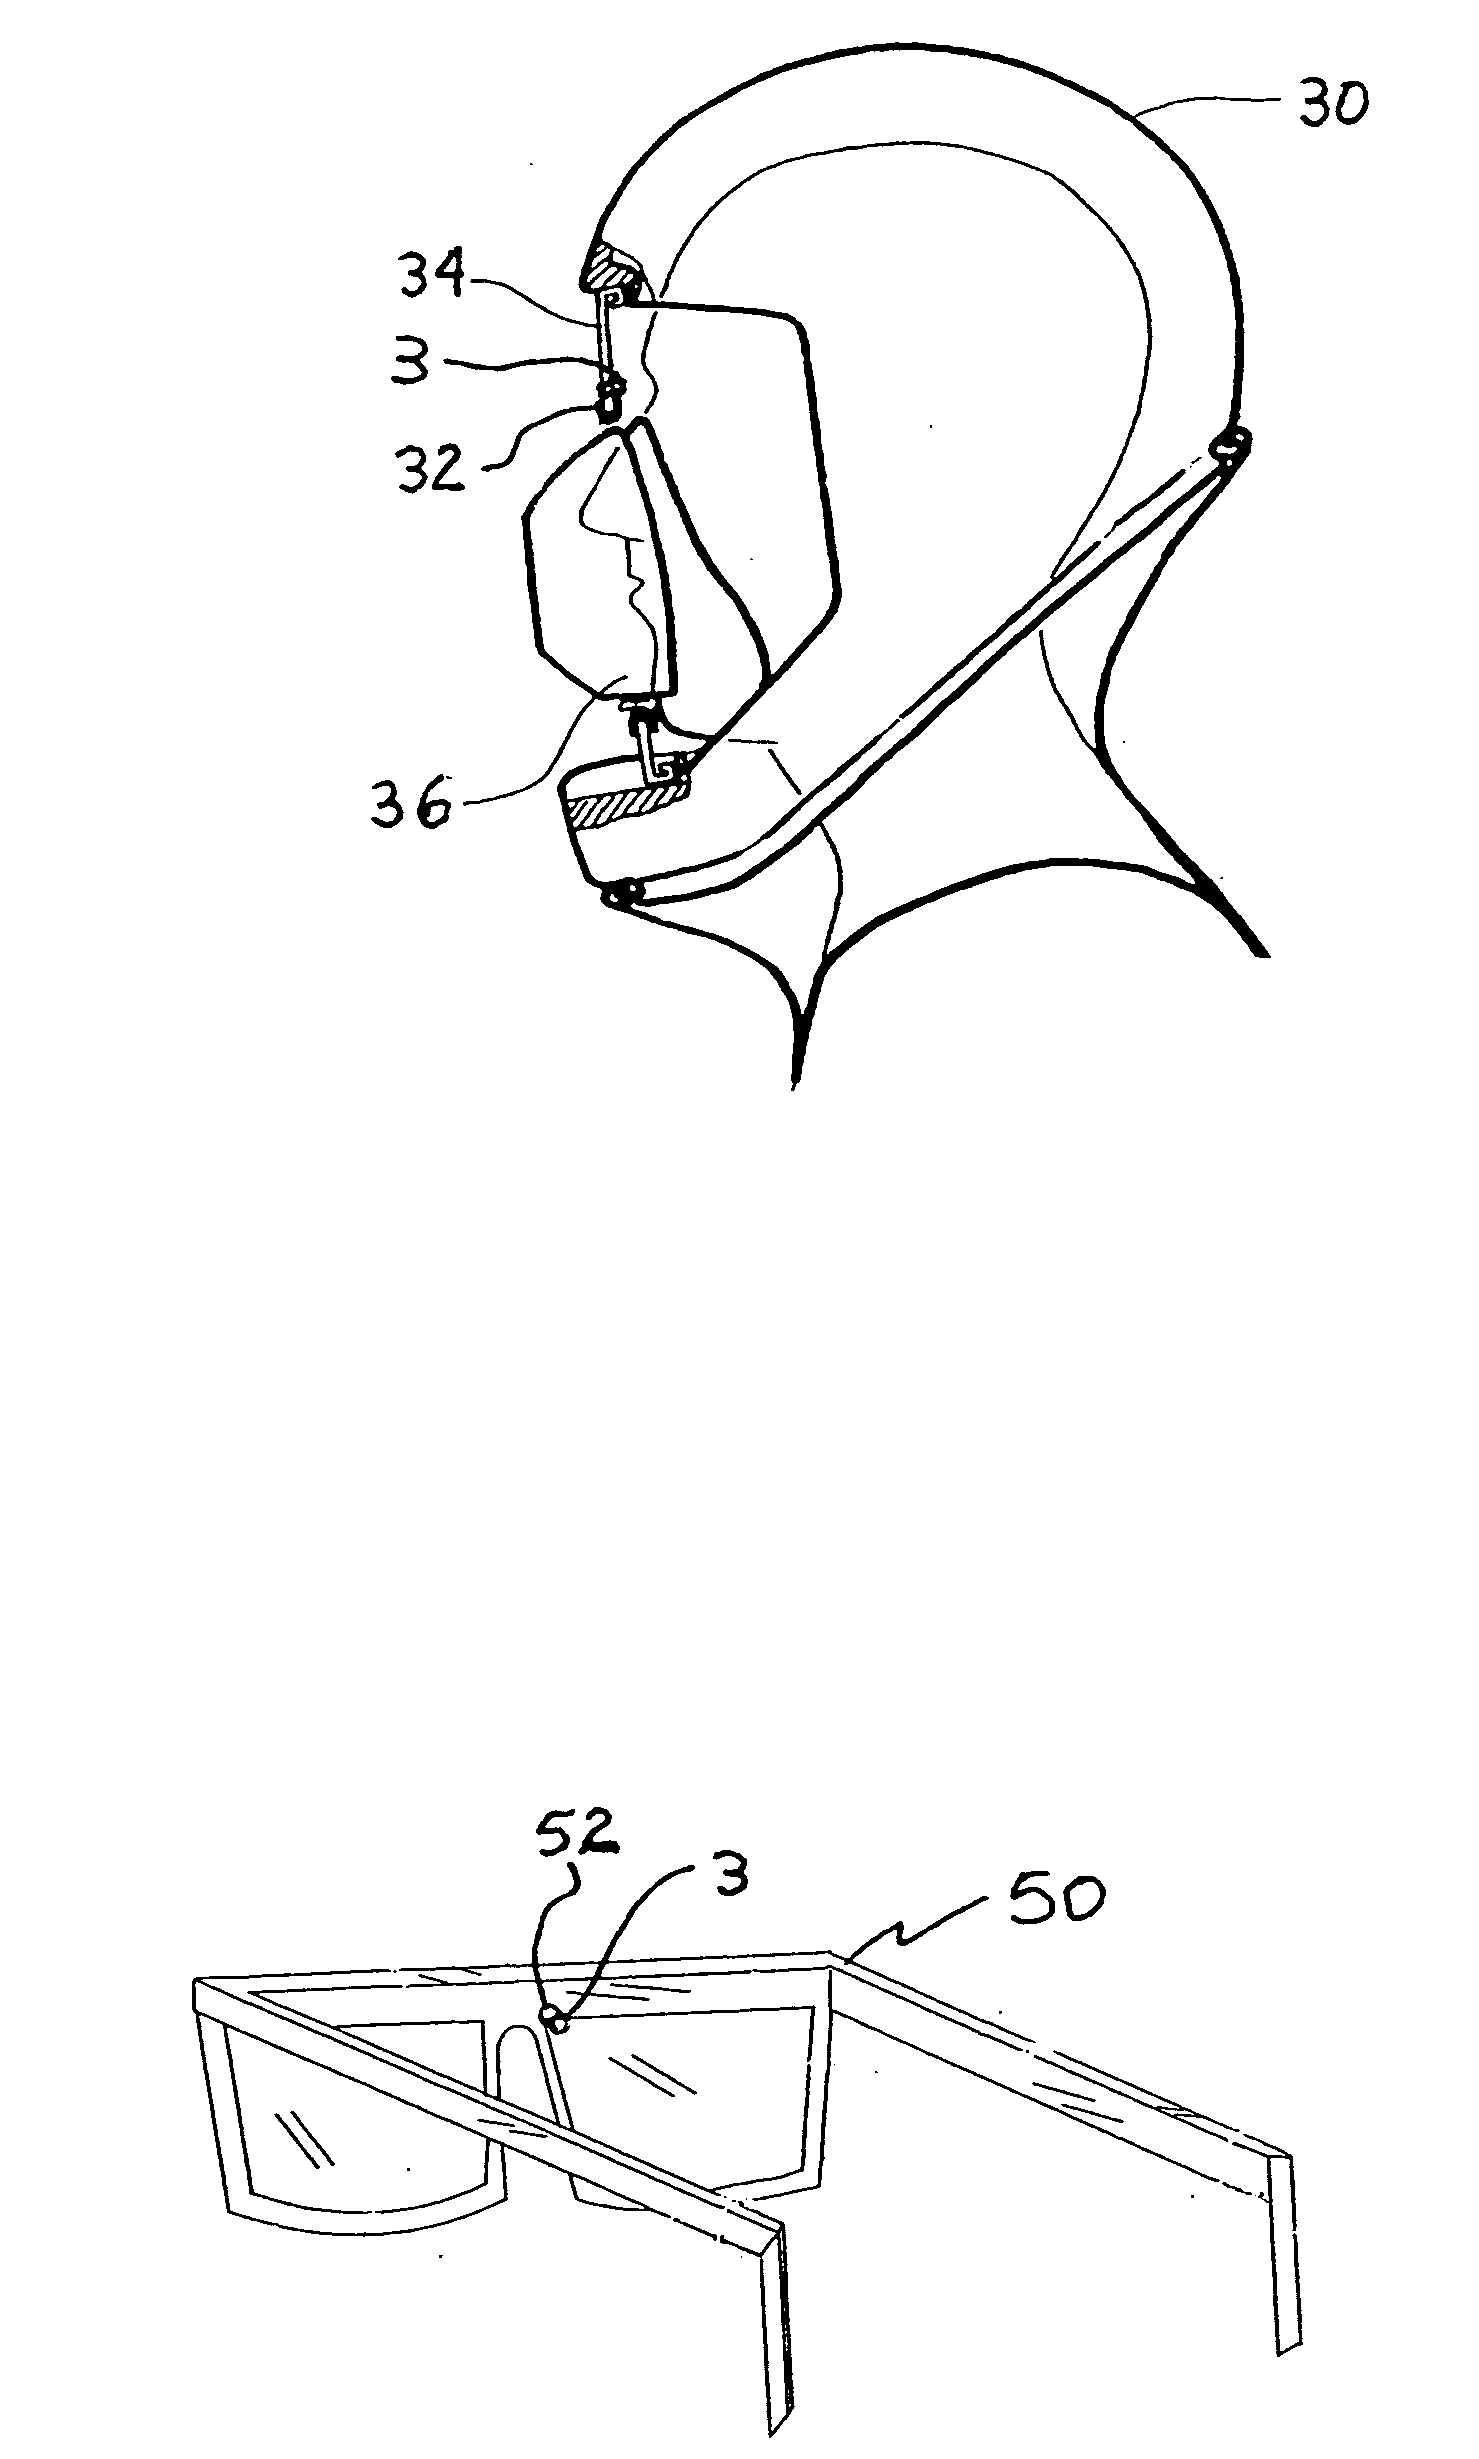 Measuring system and method for the contactless determination of the body core temperature